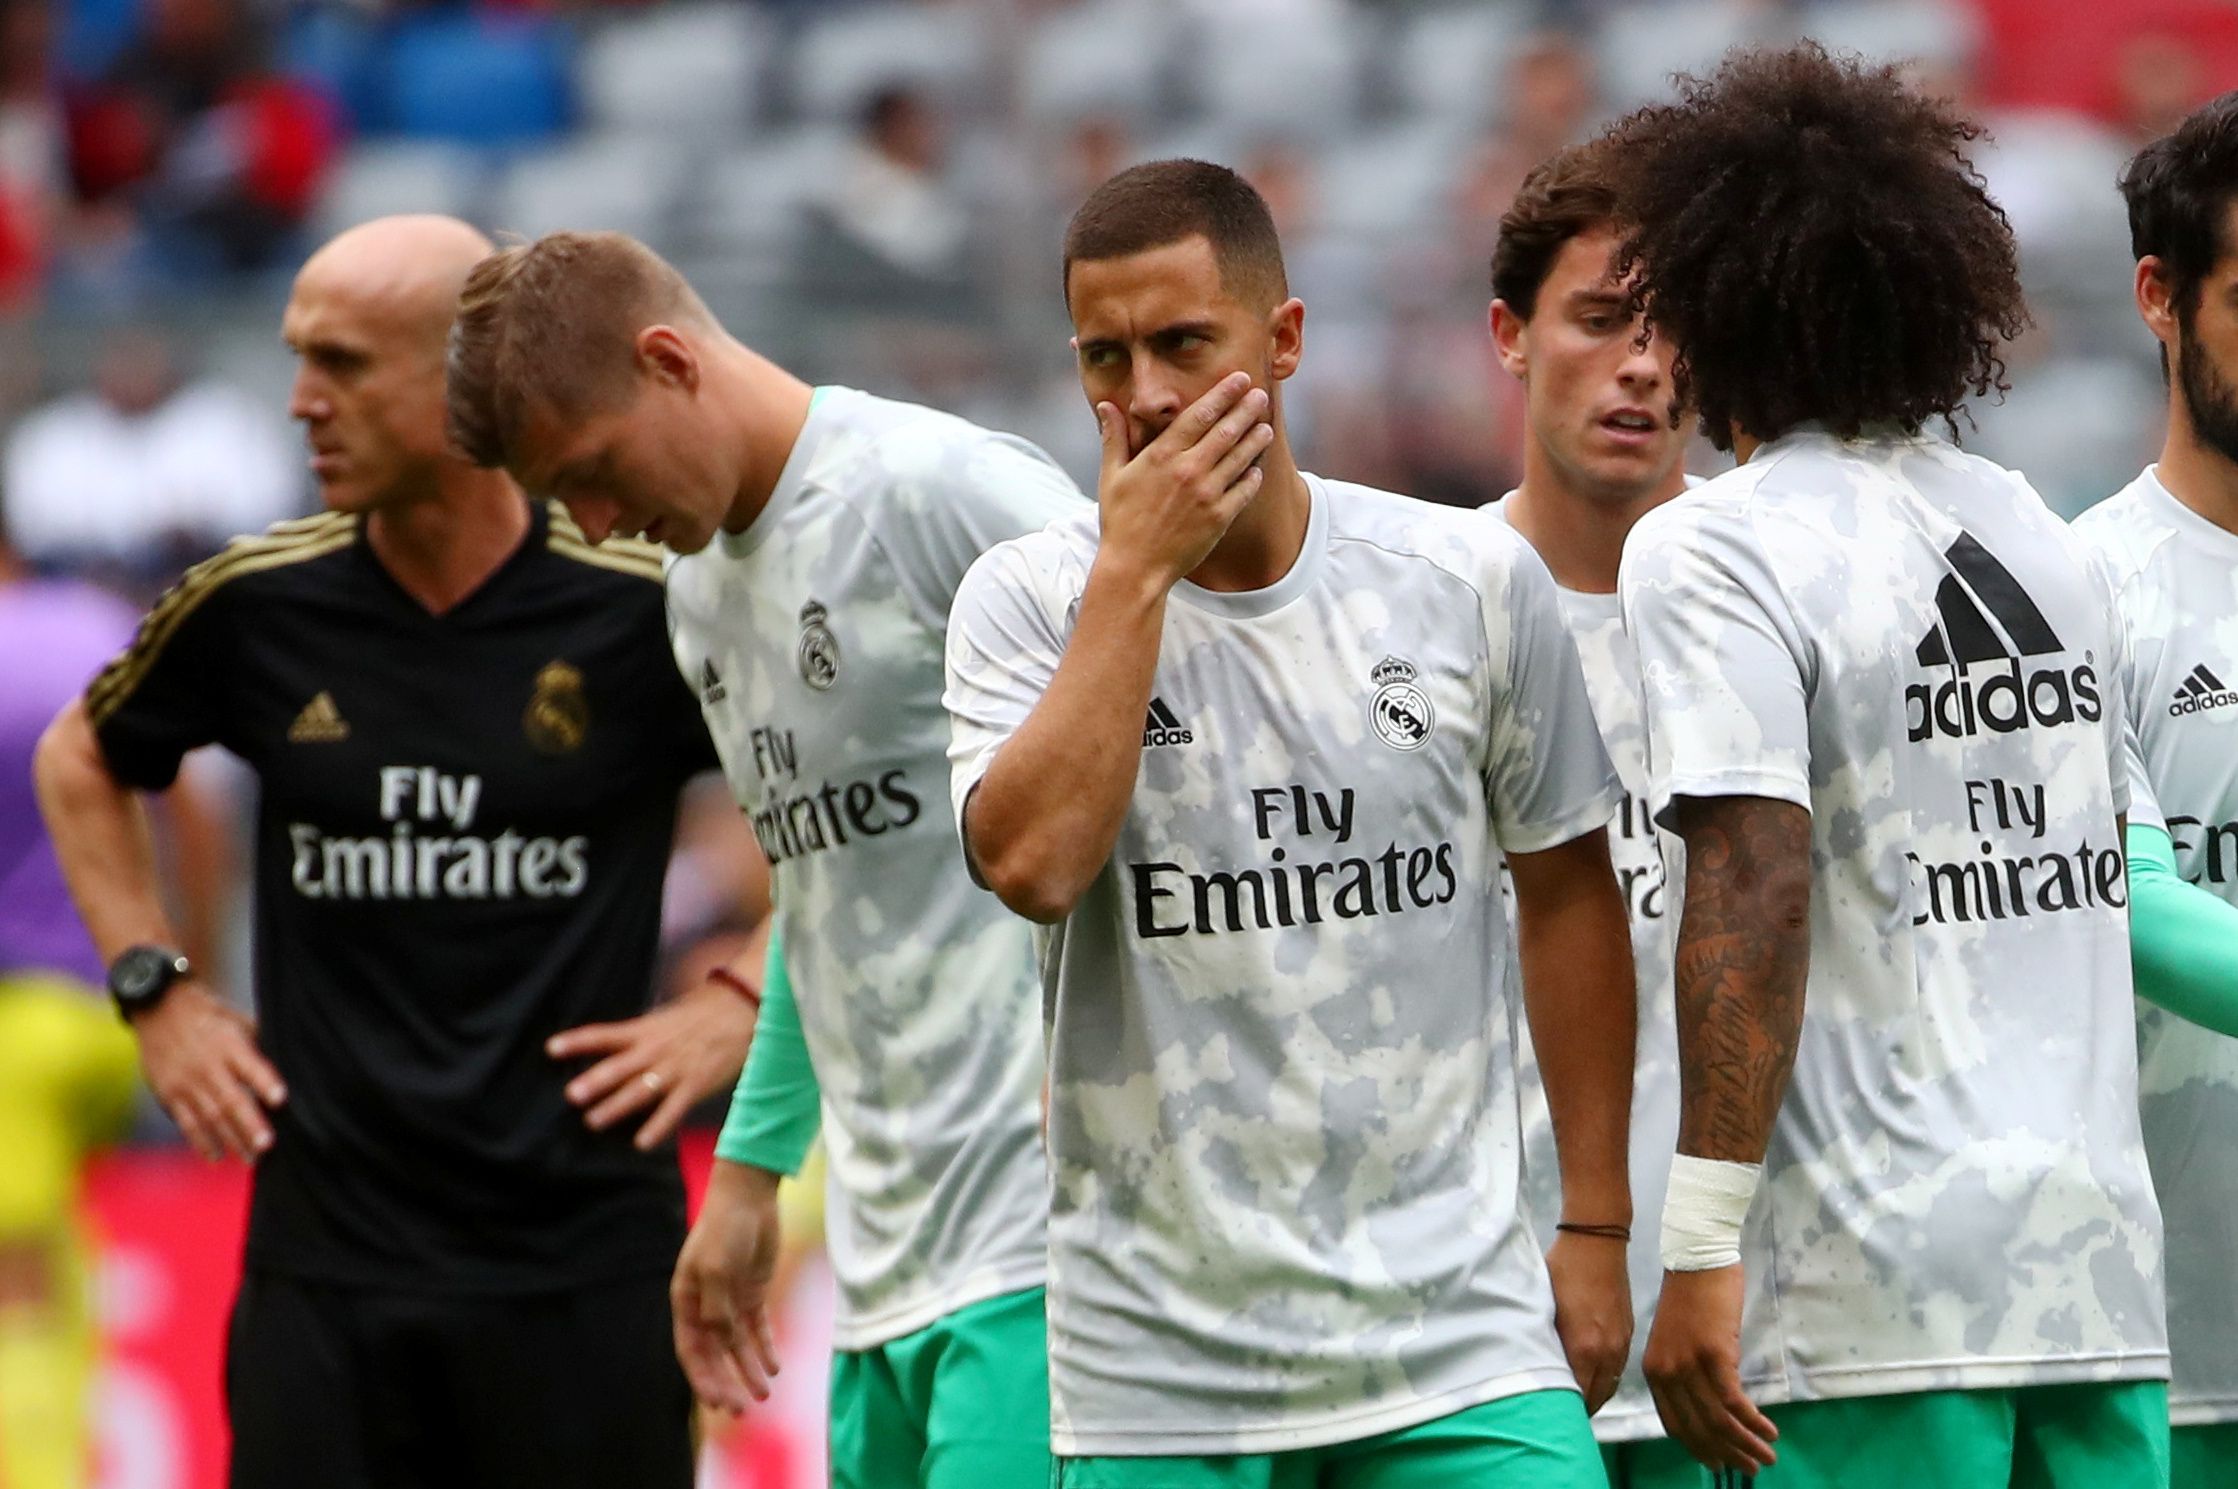 Soccer Football - Audi Cup - Third Place Play Off - Real Madrid v Fenerbahce - Allianz Arena, Munich, Germany - July 31, 2019  Real Madrid's Eden Hazard with team mates during the warm up before the match   REUTERS/Michael Dalder